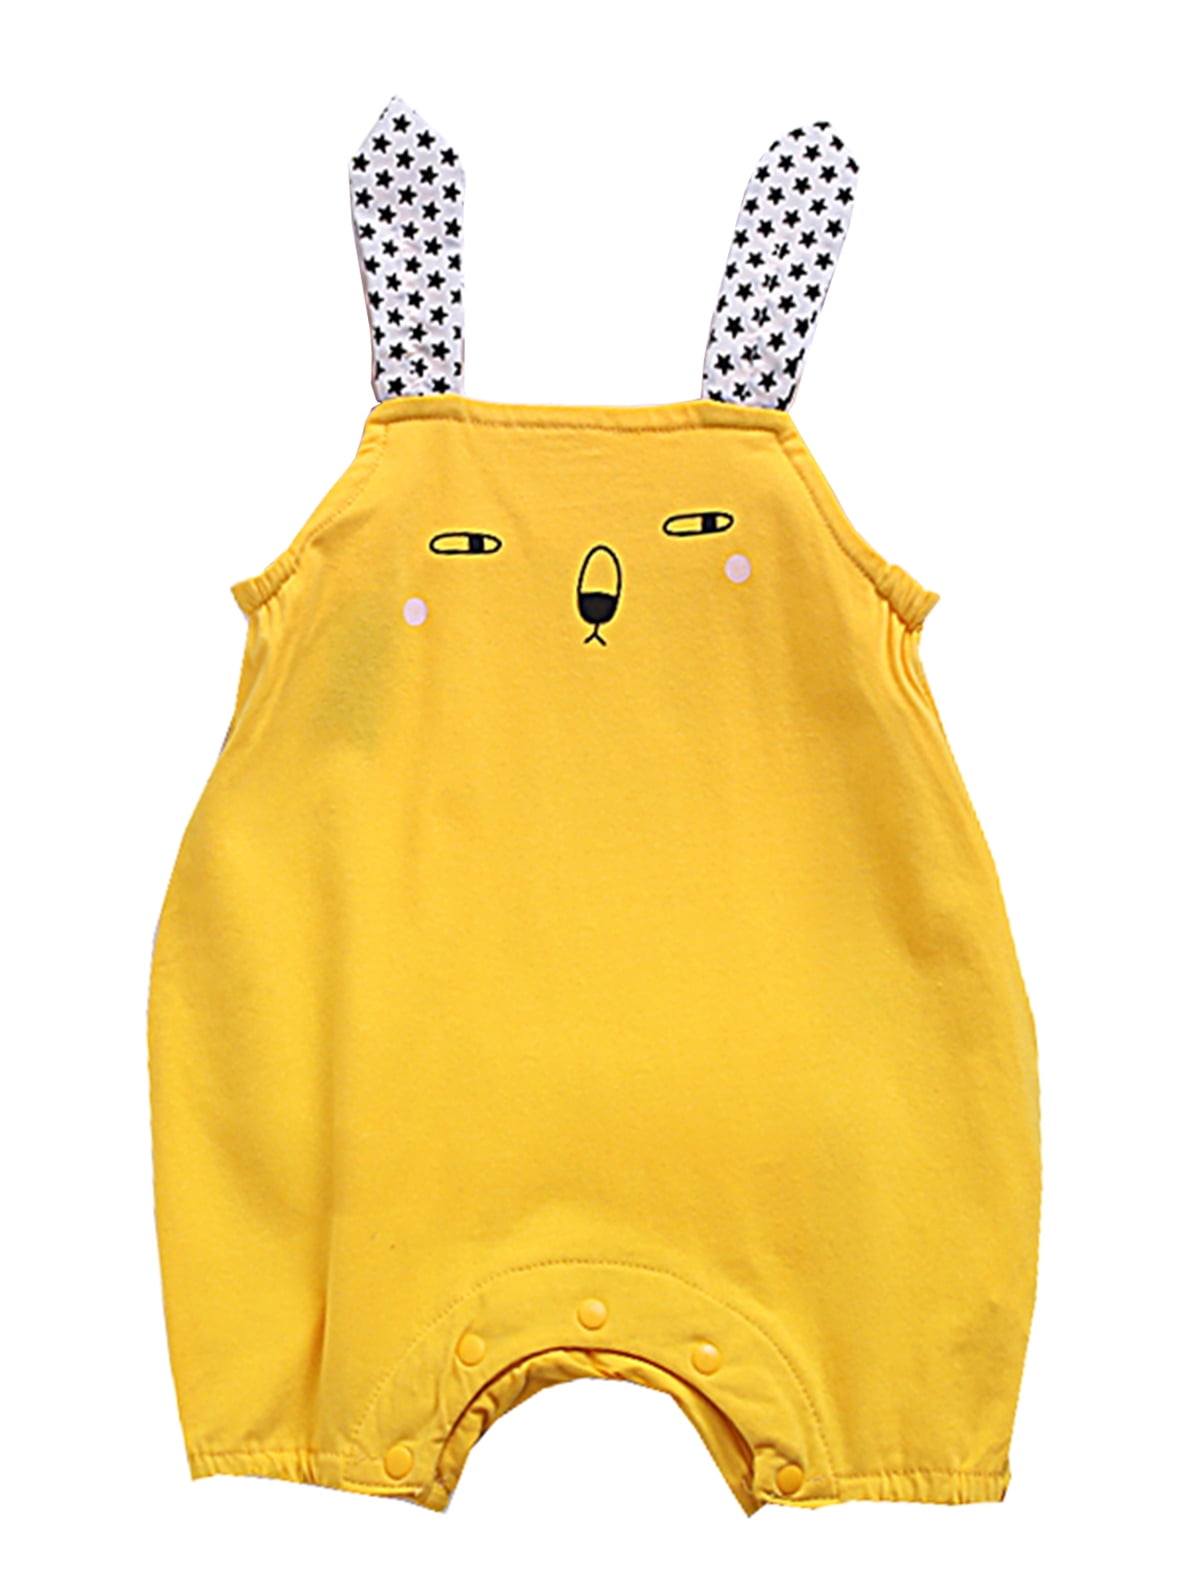 Newborn Onesie Summer Clothes Headband Outfit with Bowknot Kissybaby Baby Girl Lemon Romper